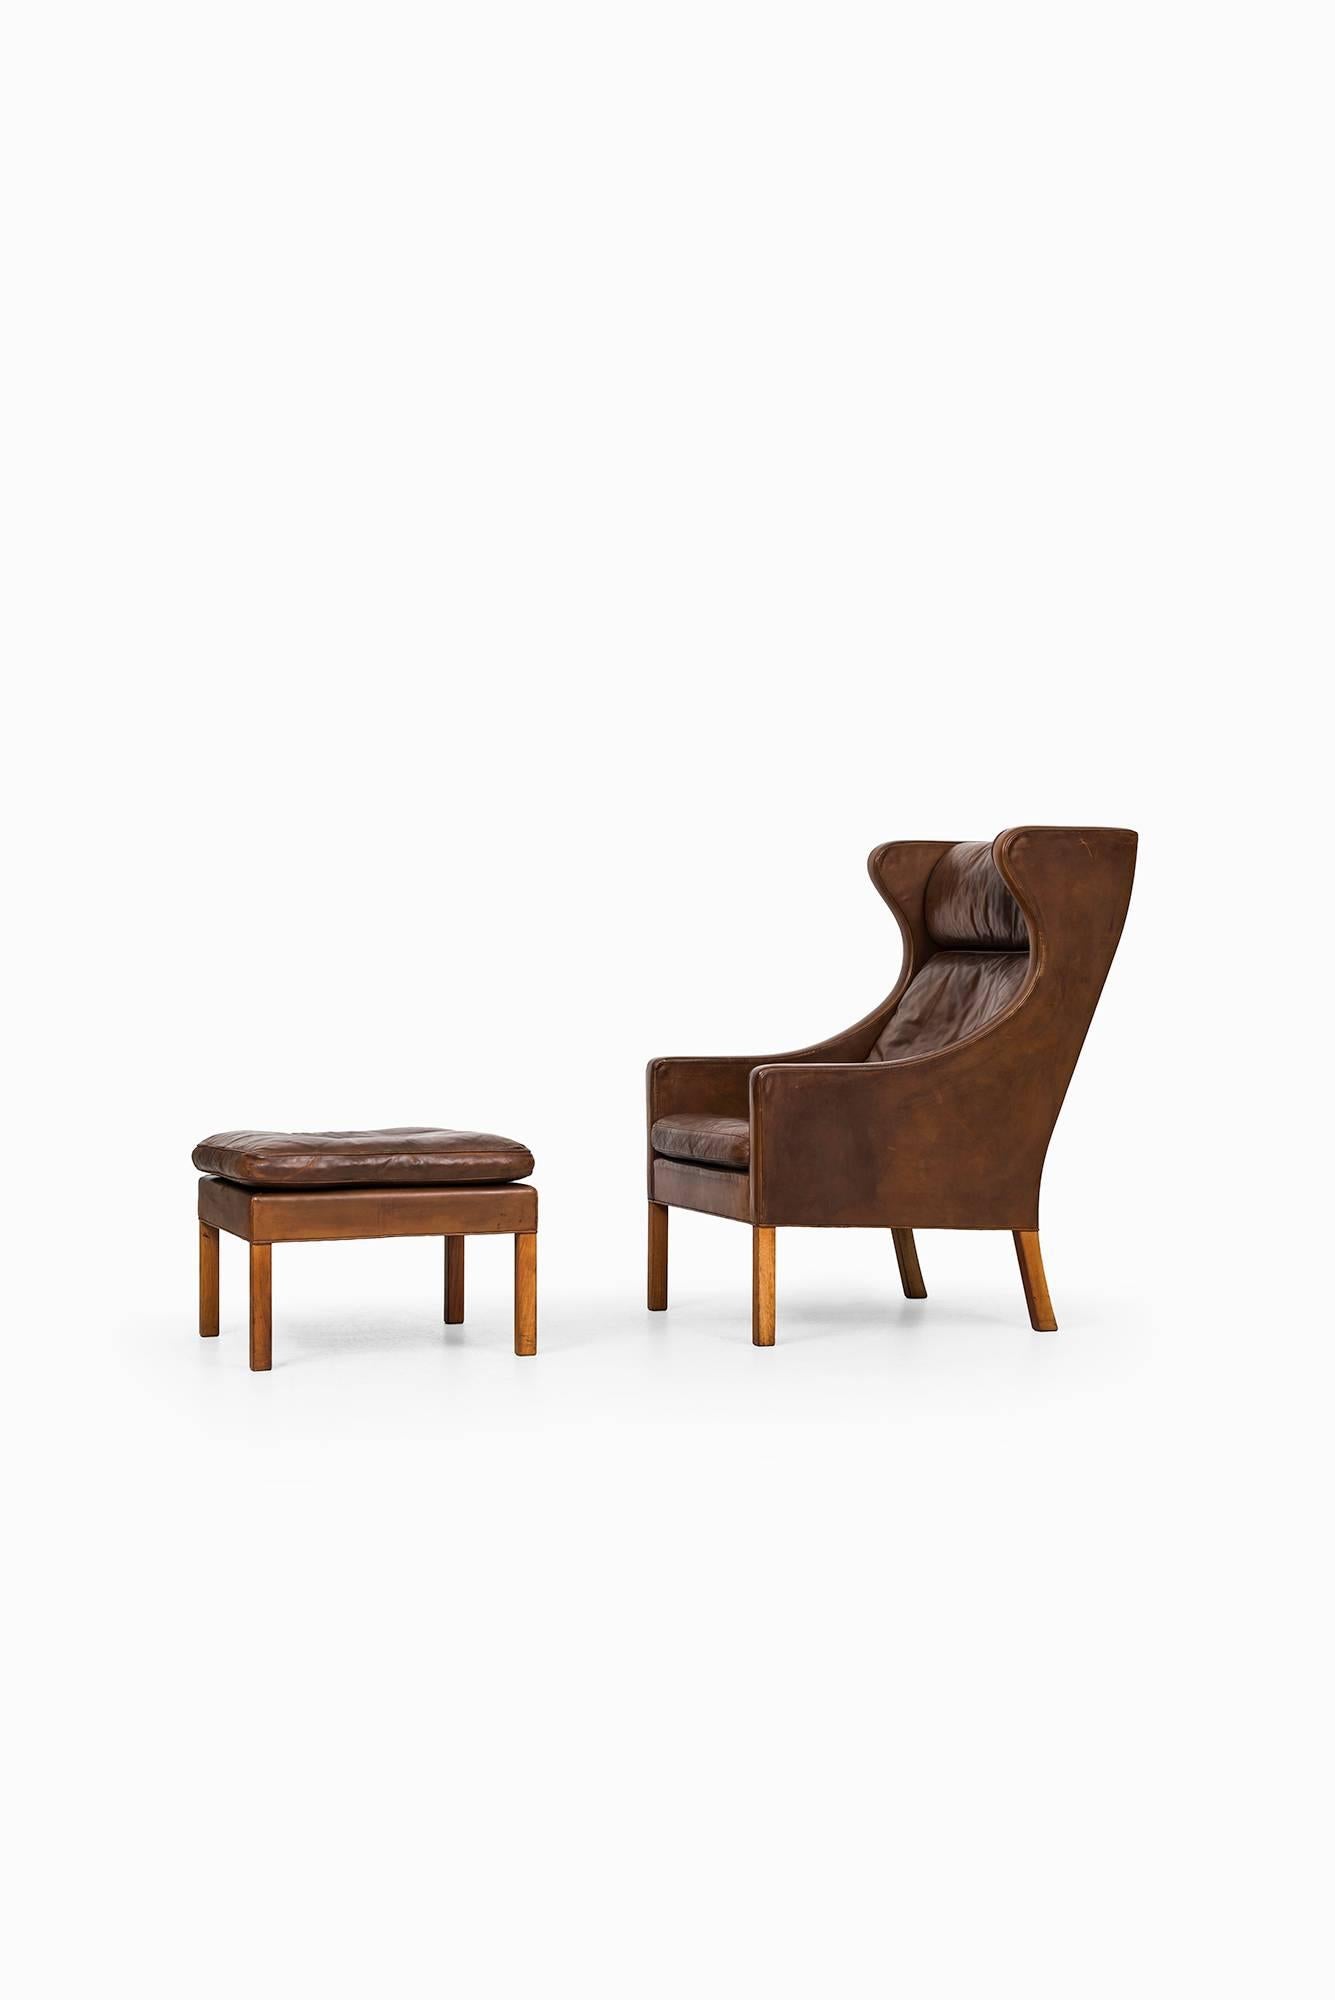 Leather Børge Mogensen Wingback Chair Model 2204 with Stool Model 2202